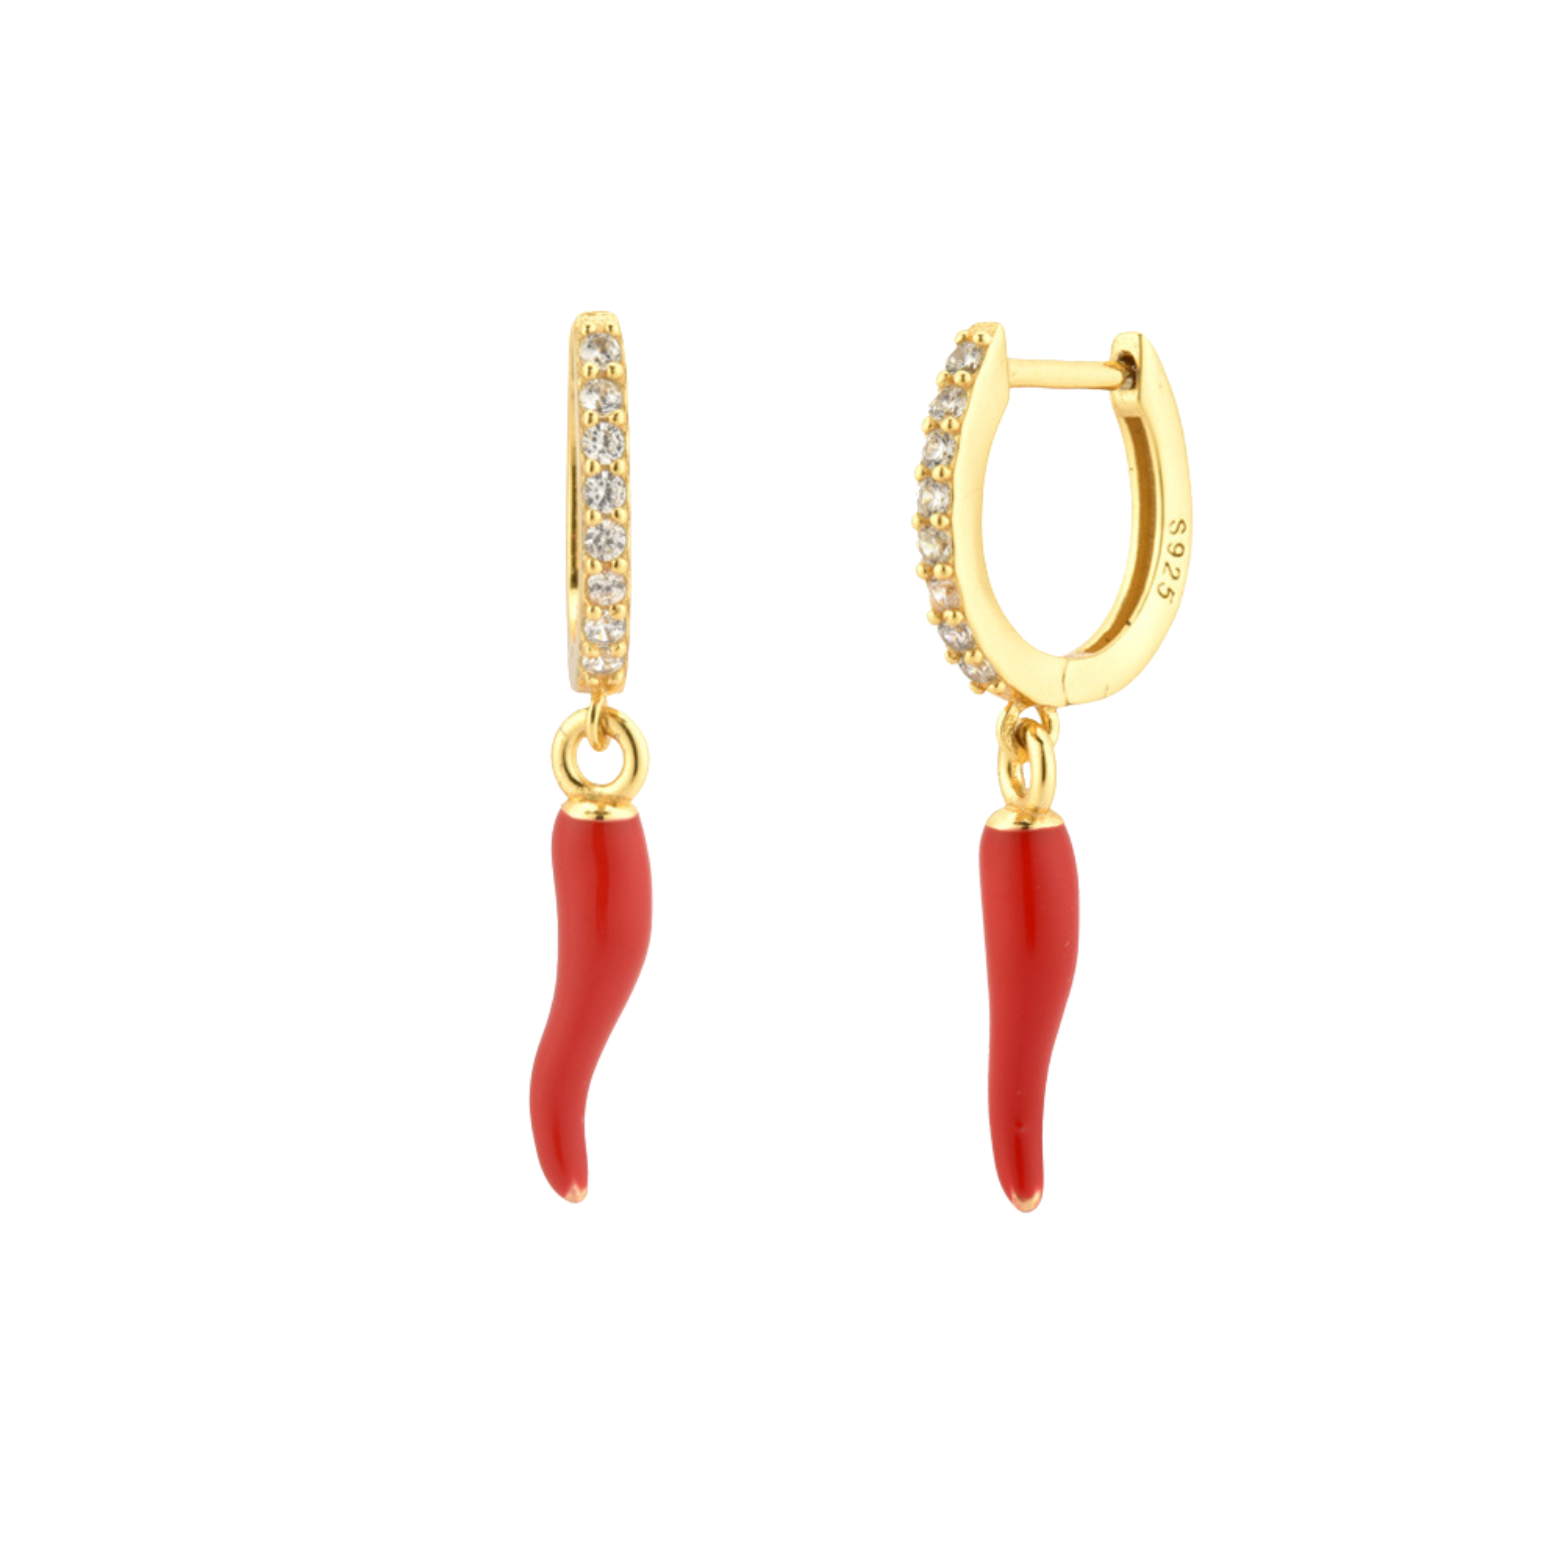 Close-up of 14K gold-plated Cornicello hoop earrings with intricate design details